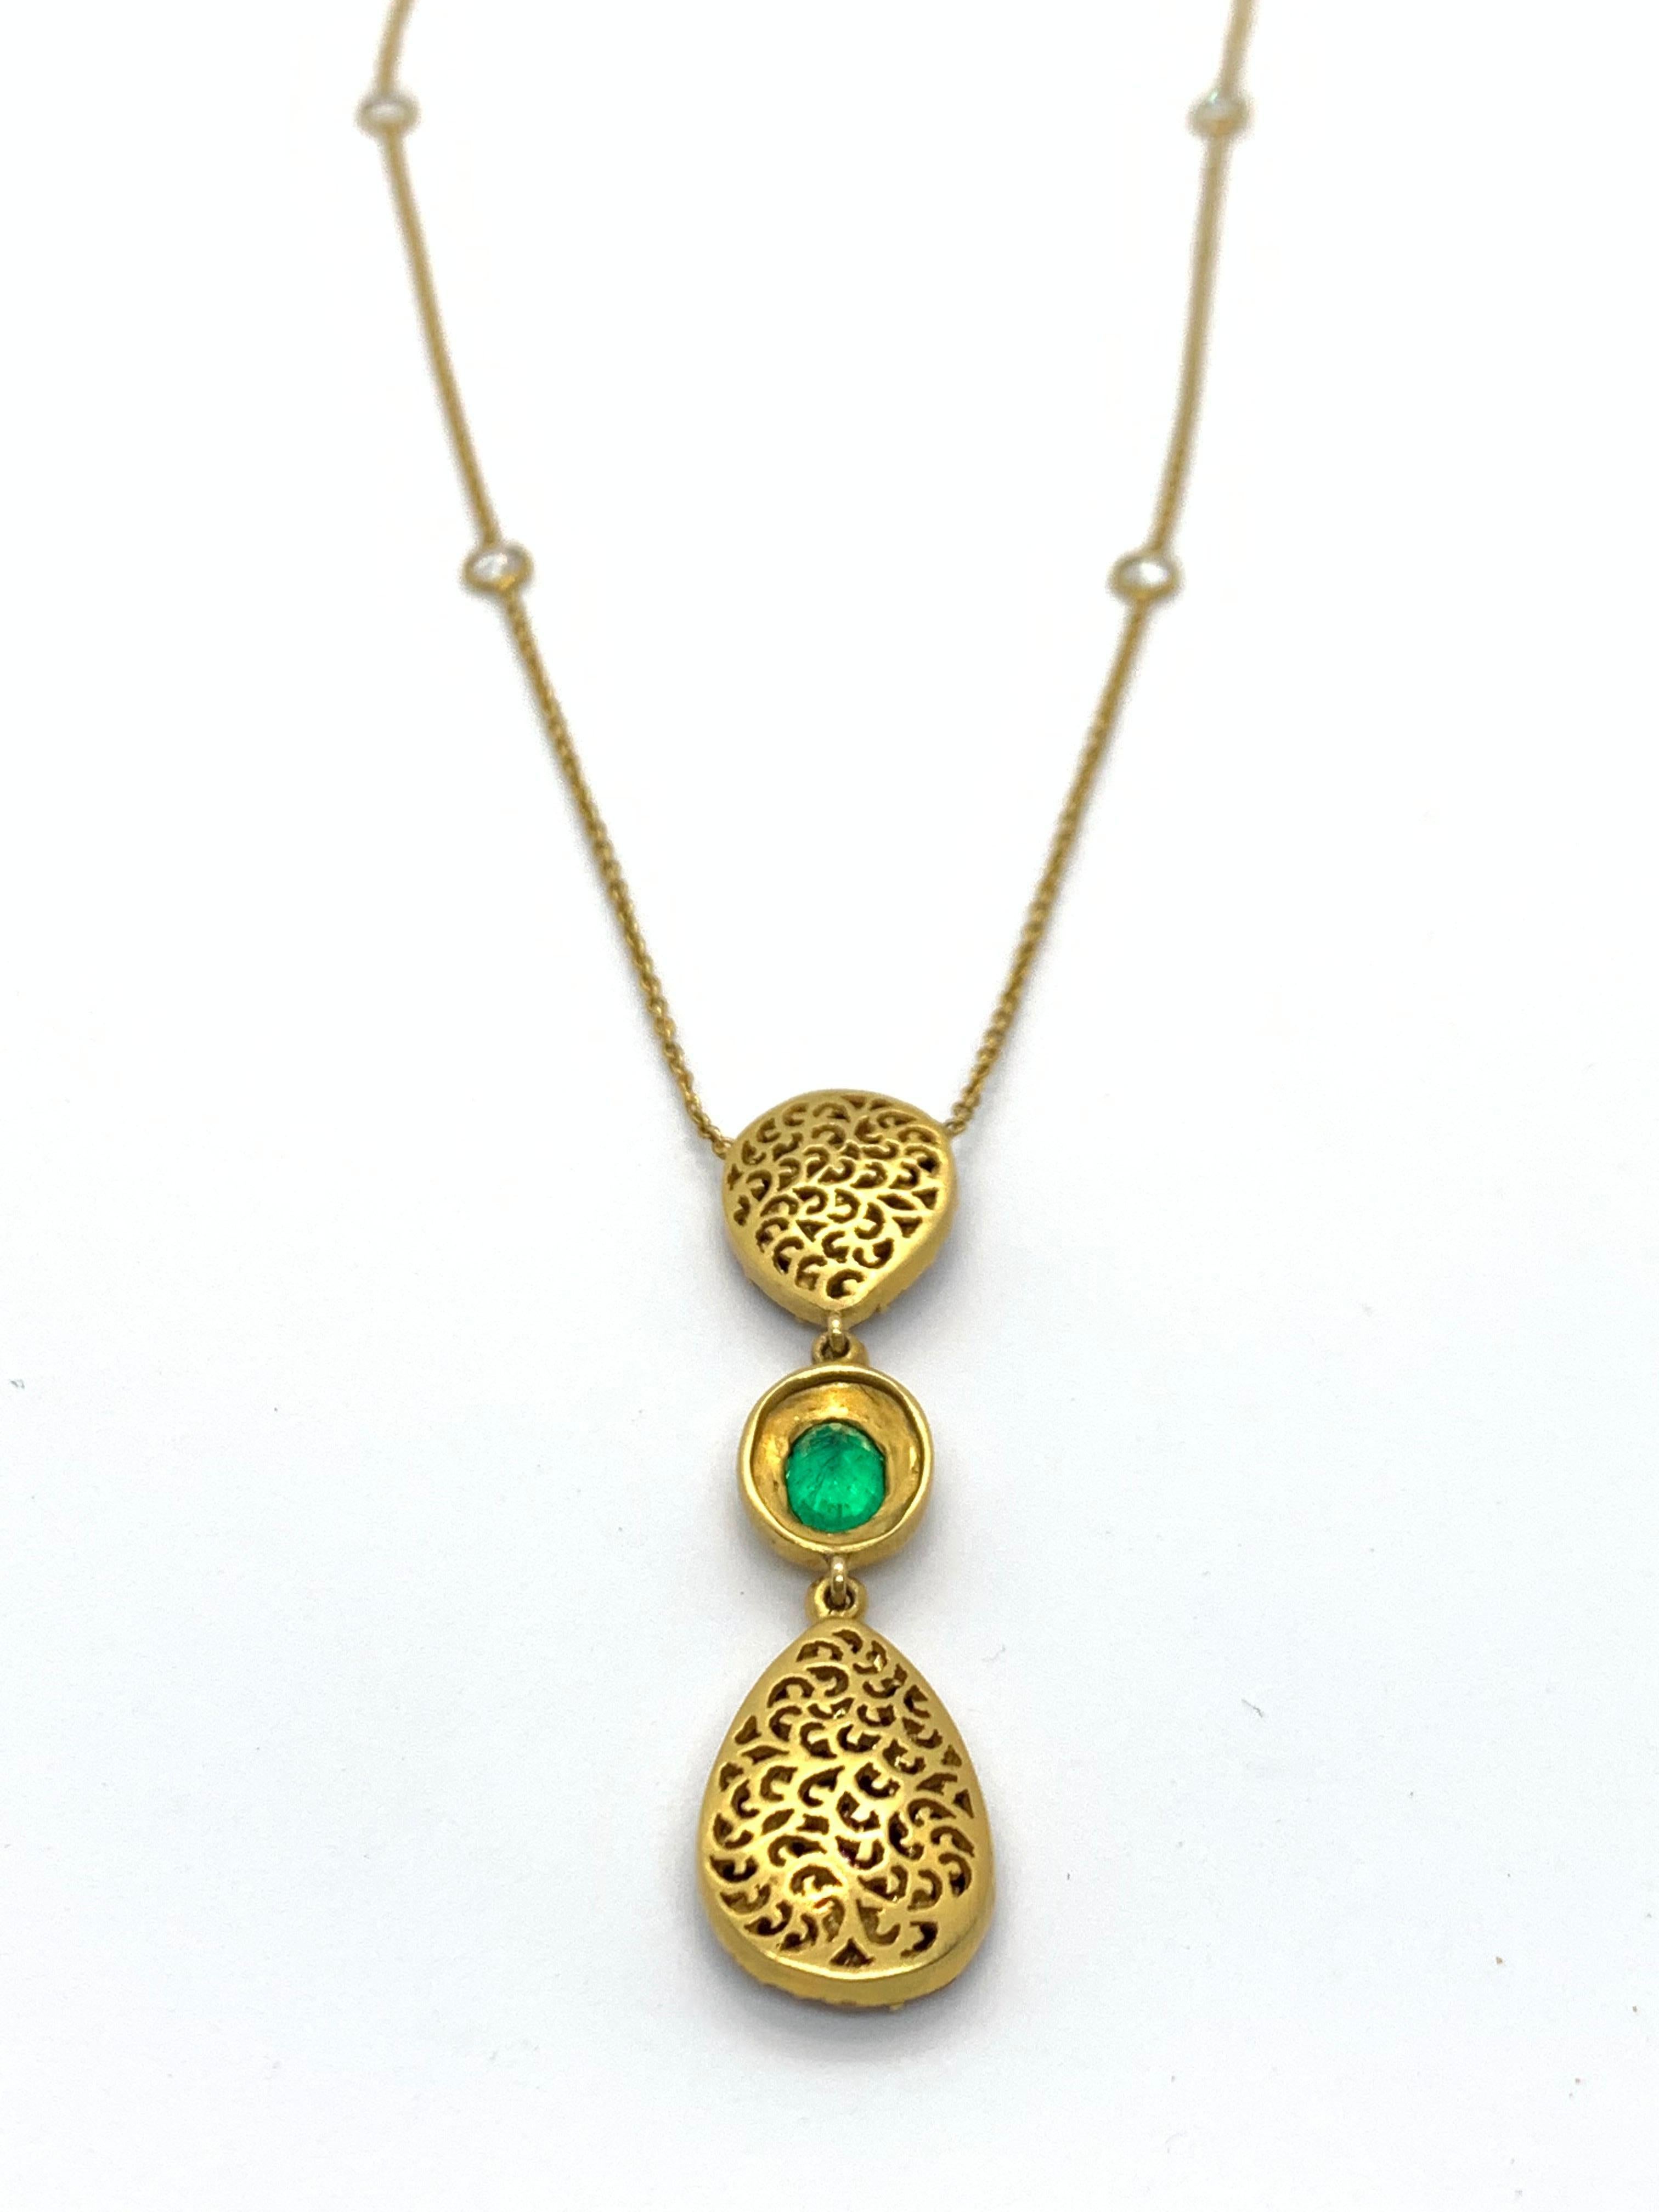 Necklace with 2.28 Carats Diamonds and Emeralds Handcrafted in 18k Gold For Sale 4